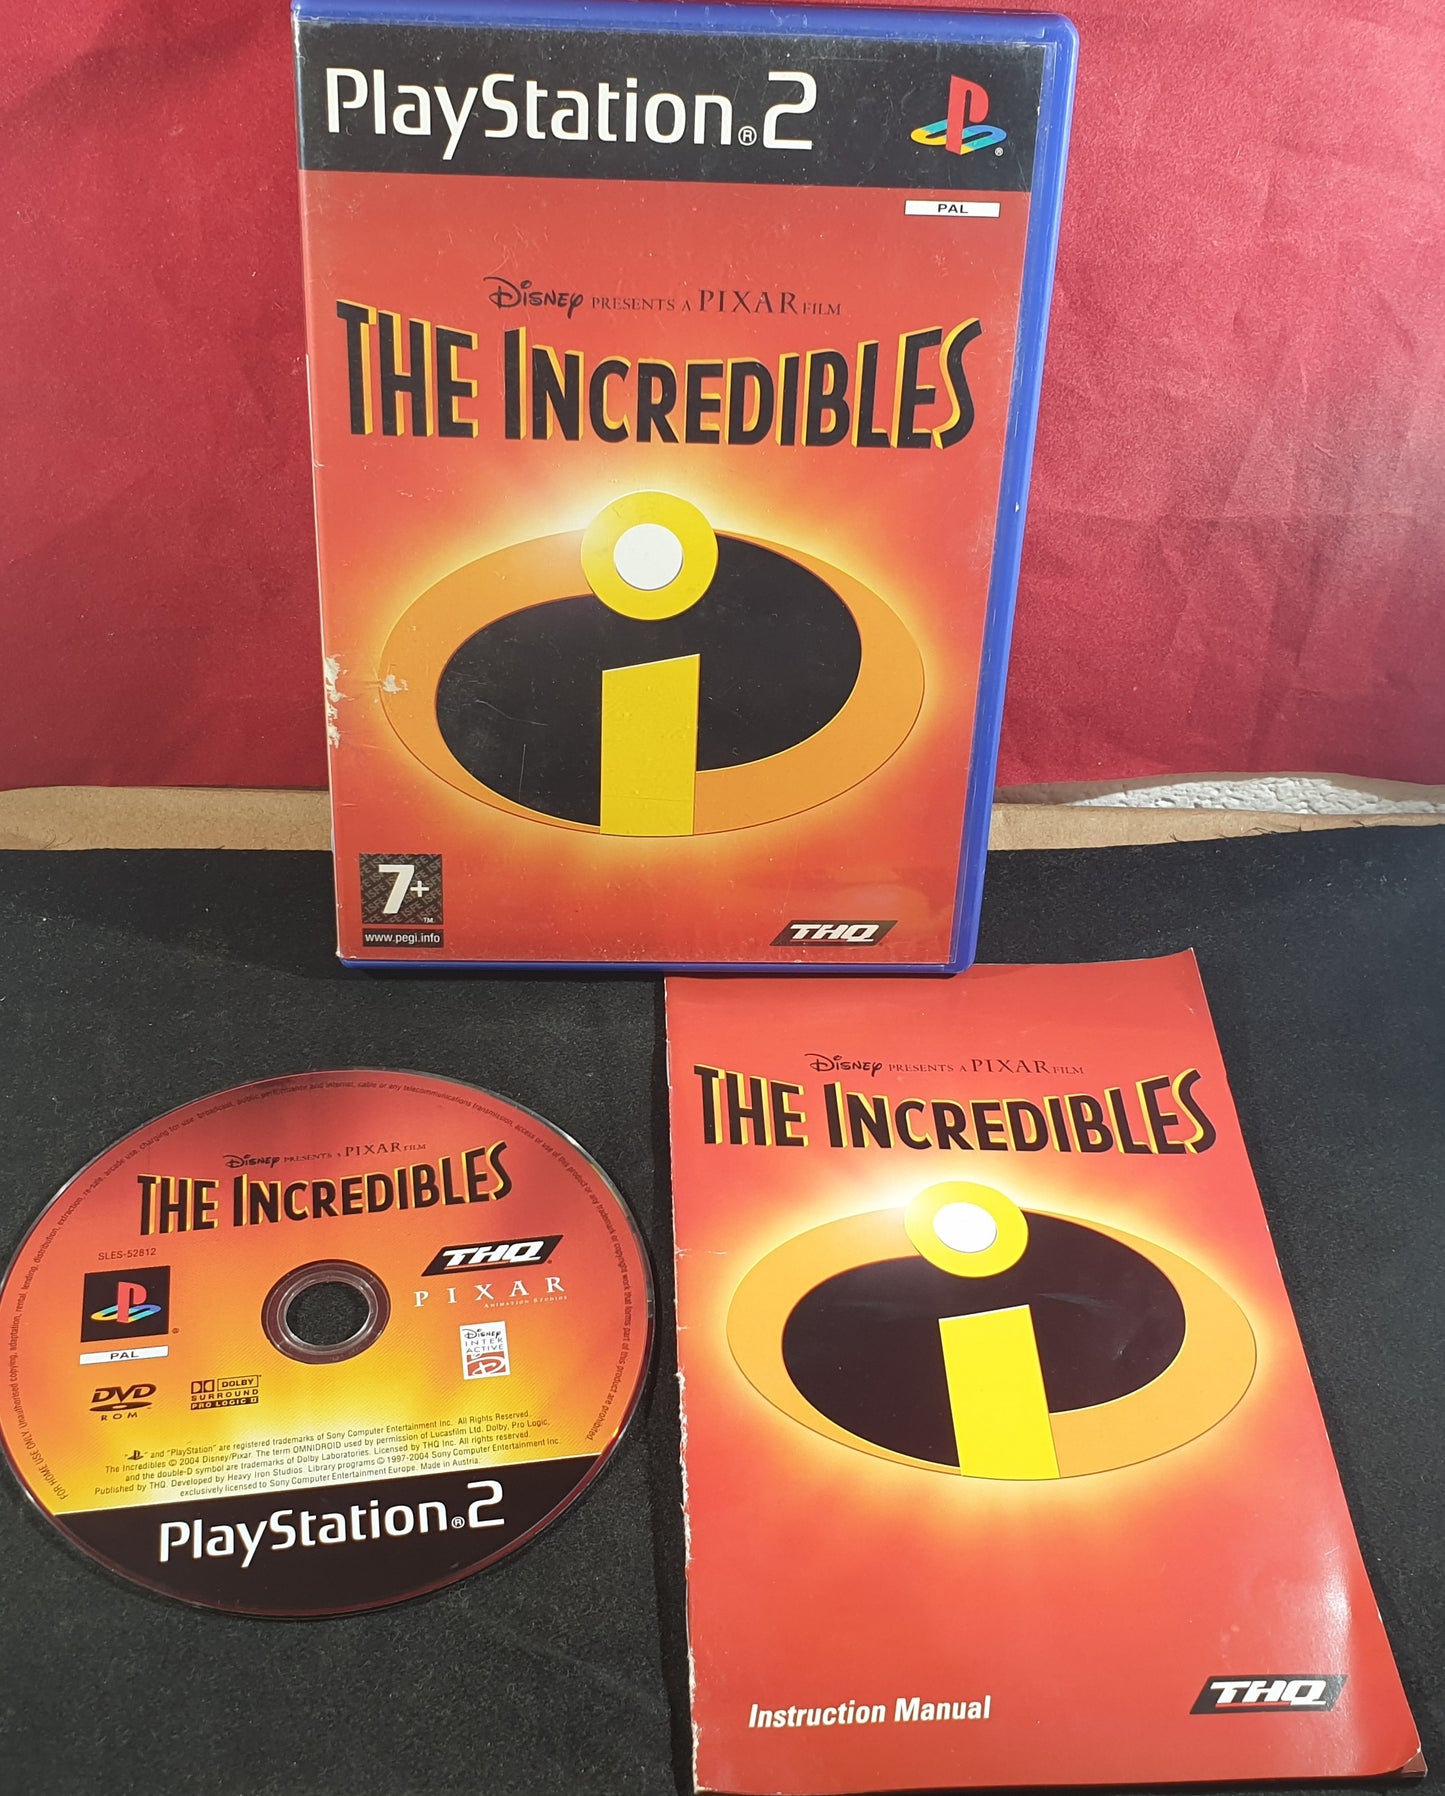 The Incredibles Sony Playstation 2 (PS2) Game